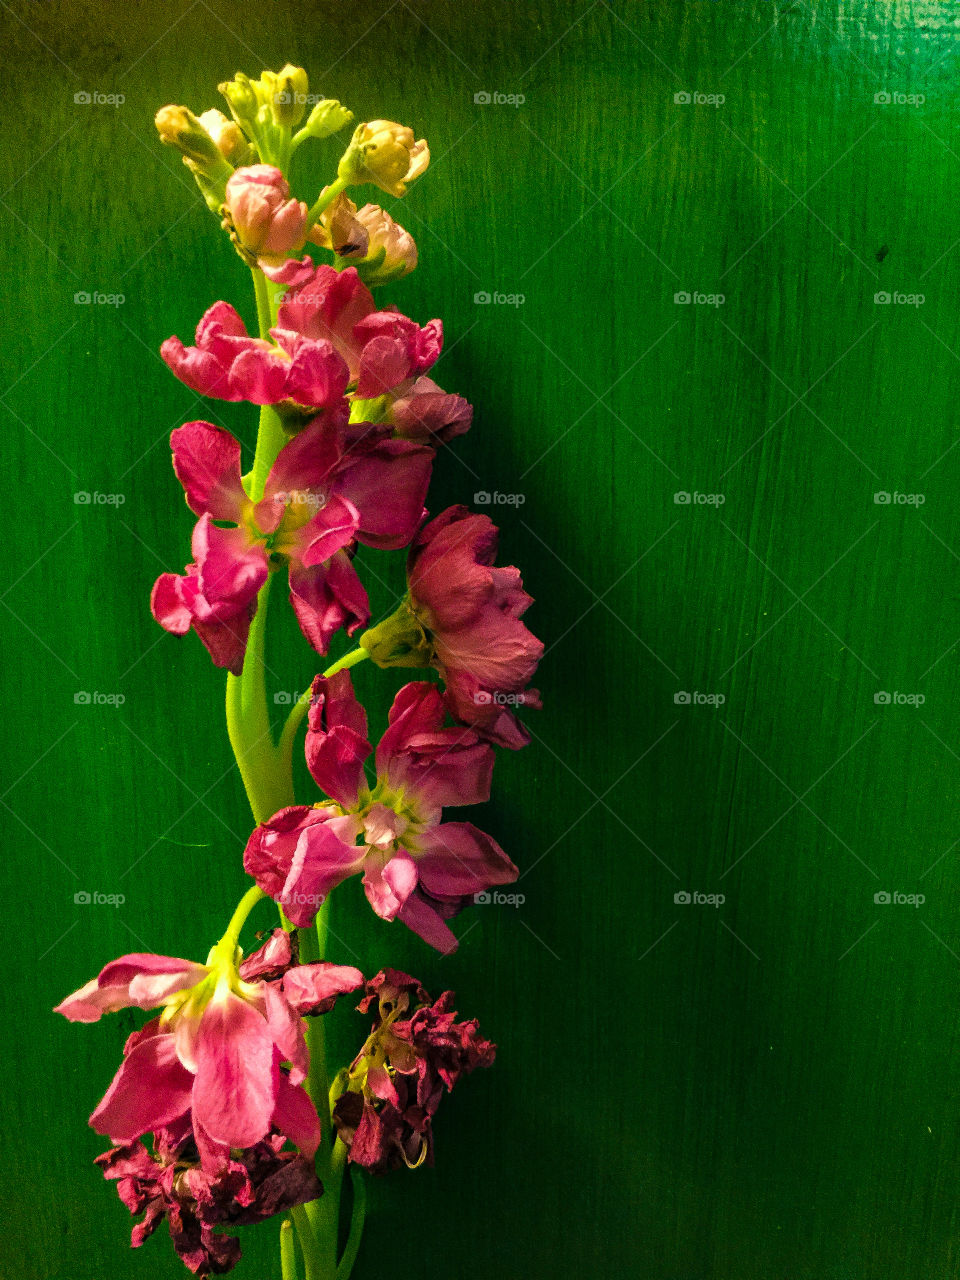 Vibrant pink flowers against neon green background 